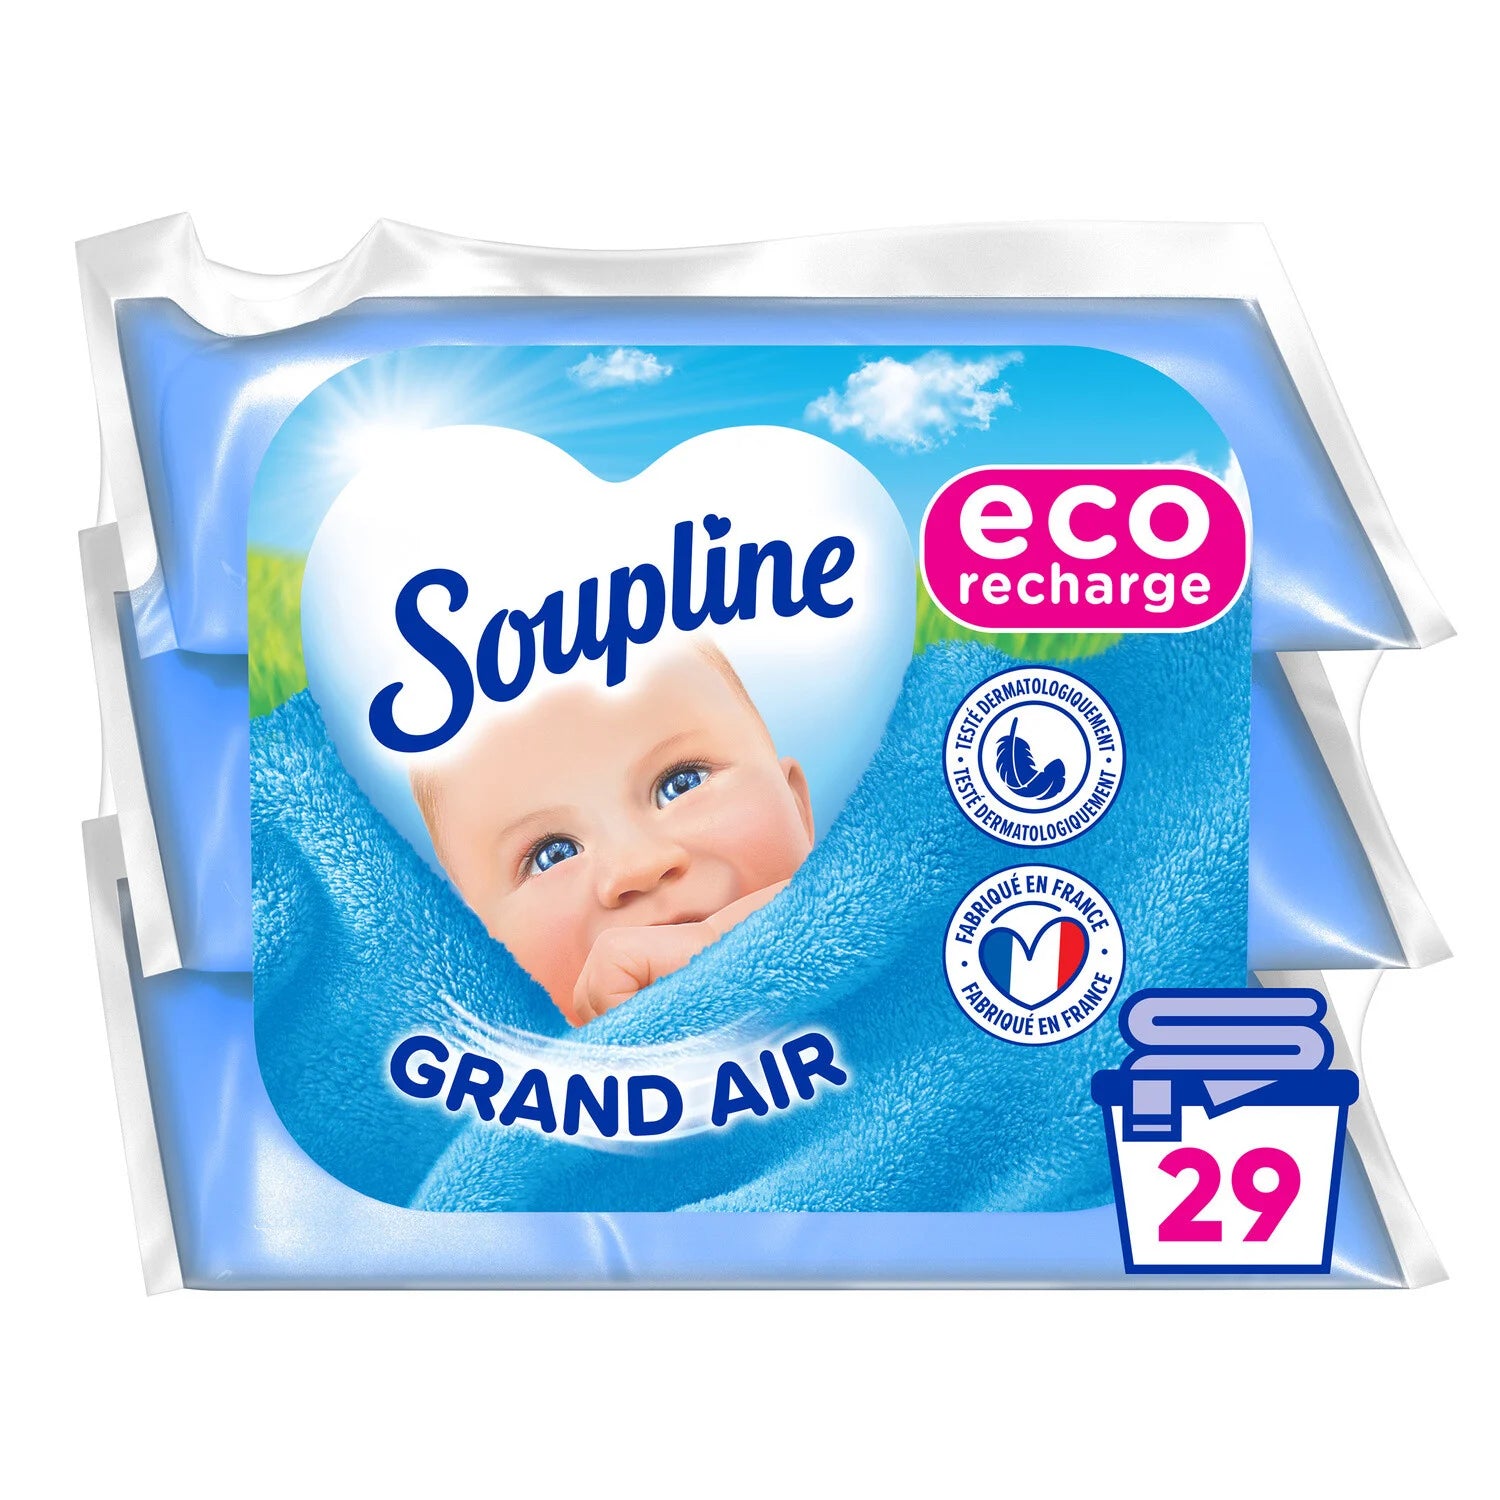 Soupline - Fabric softener - Sky Fresh eco refills - concentrated - 29 –  Homeplace